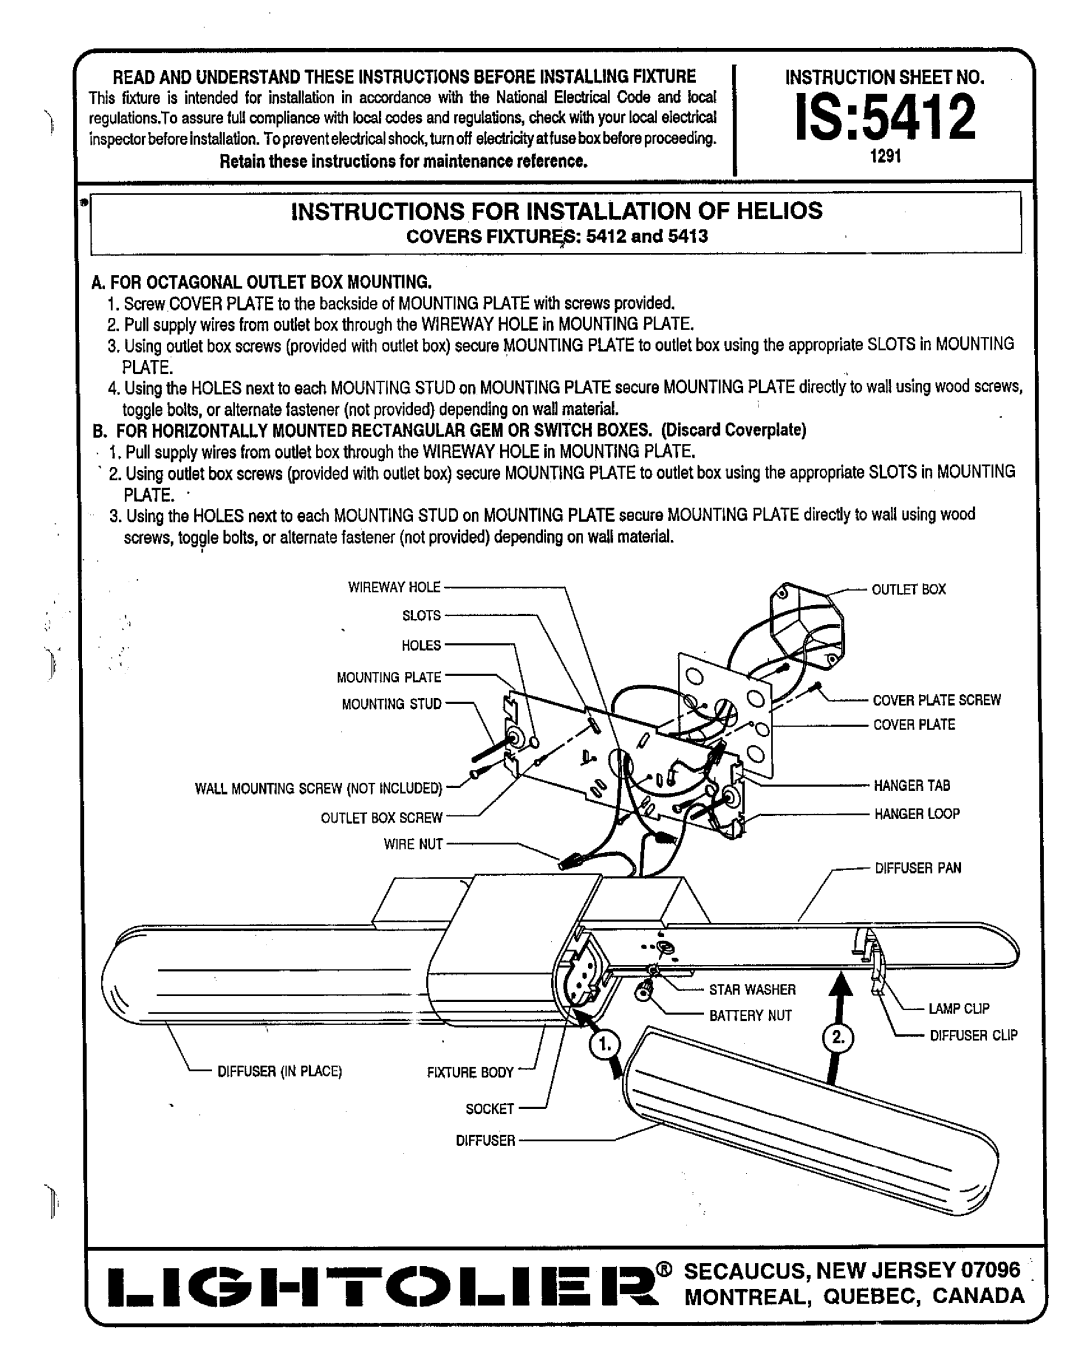 Lightolier 5412, 5413 instruction sheet Is, Instructions For Installation Of Helios 